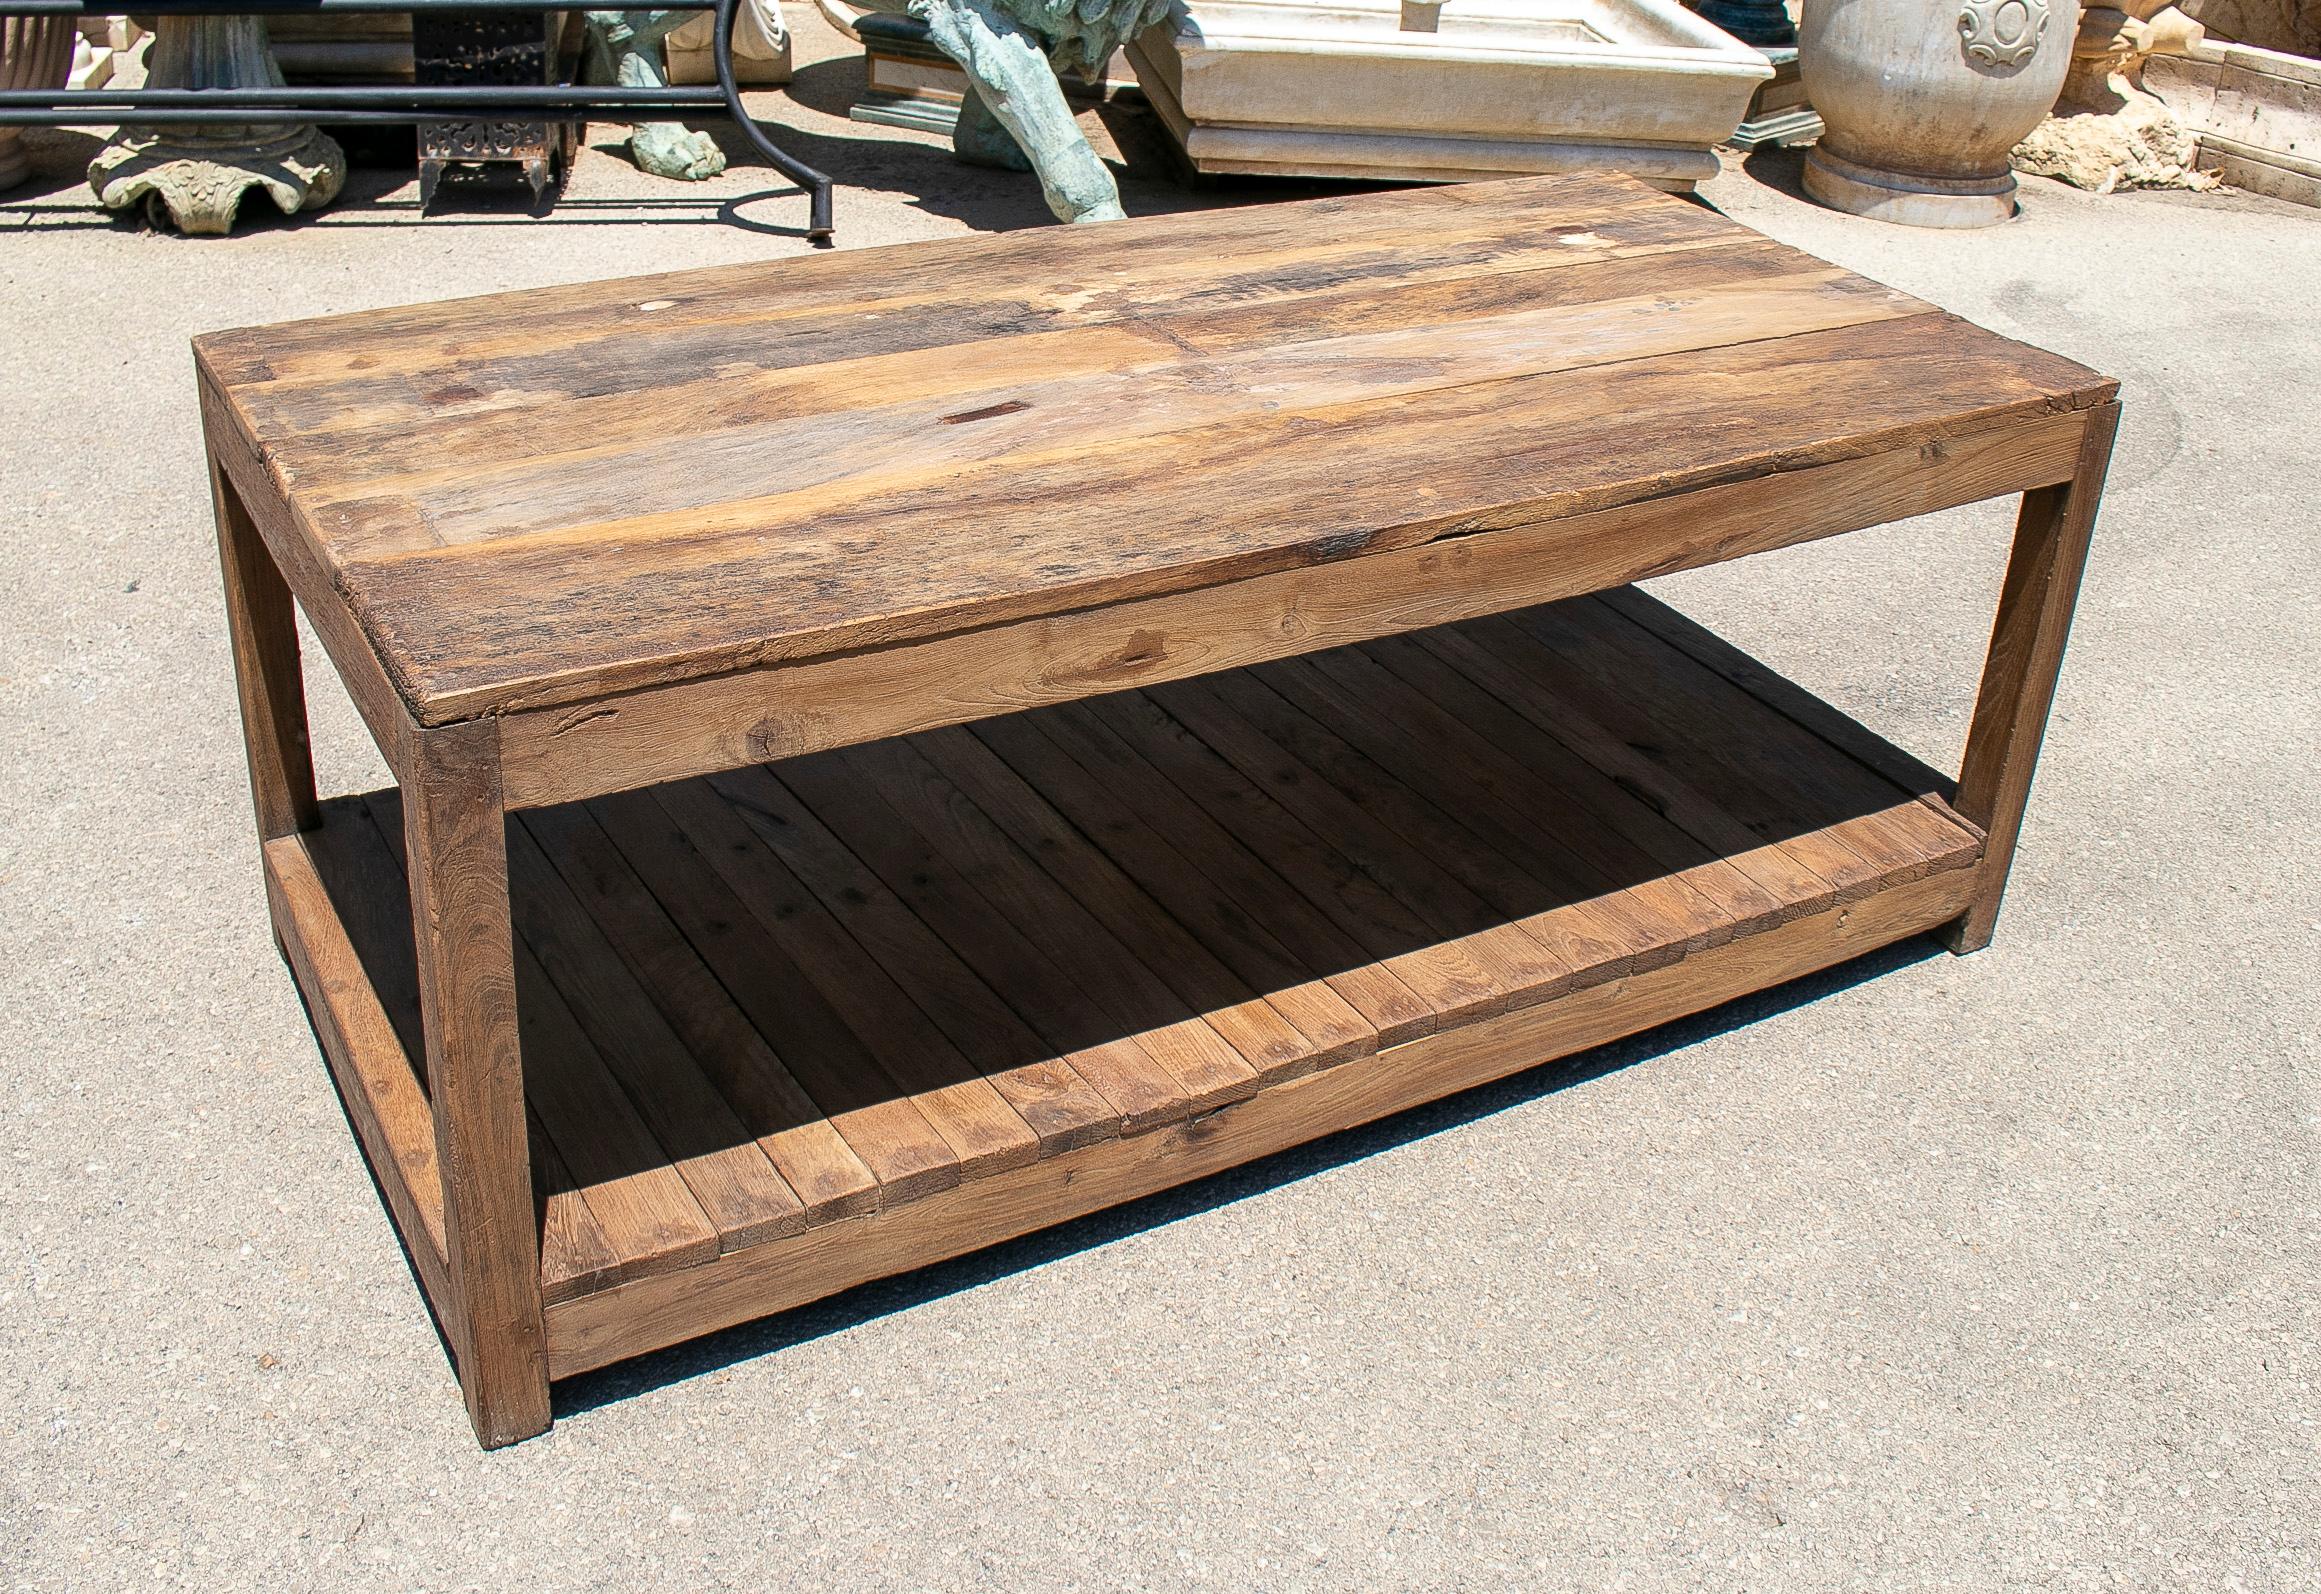 Rustic coffee table. A 1970s Spanish washed wood farmhouse low table with bottom shelf.